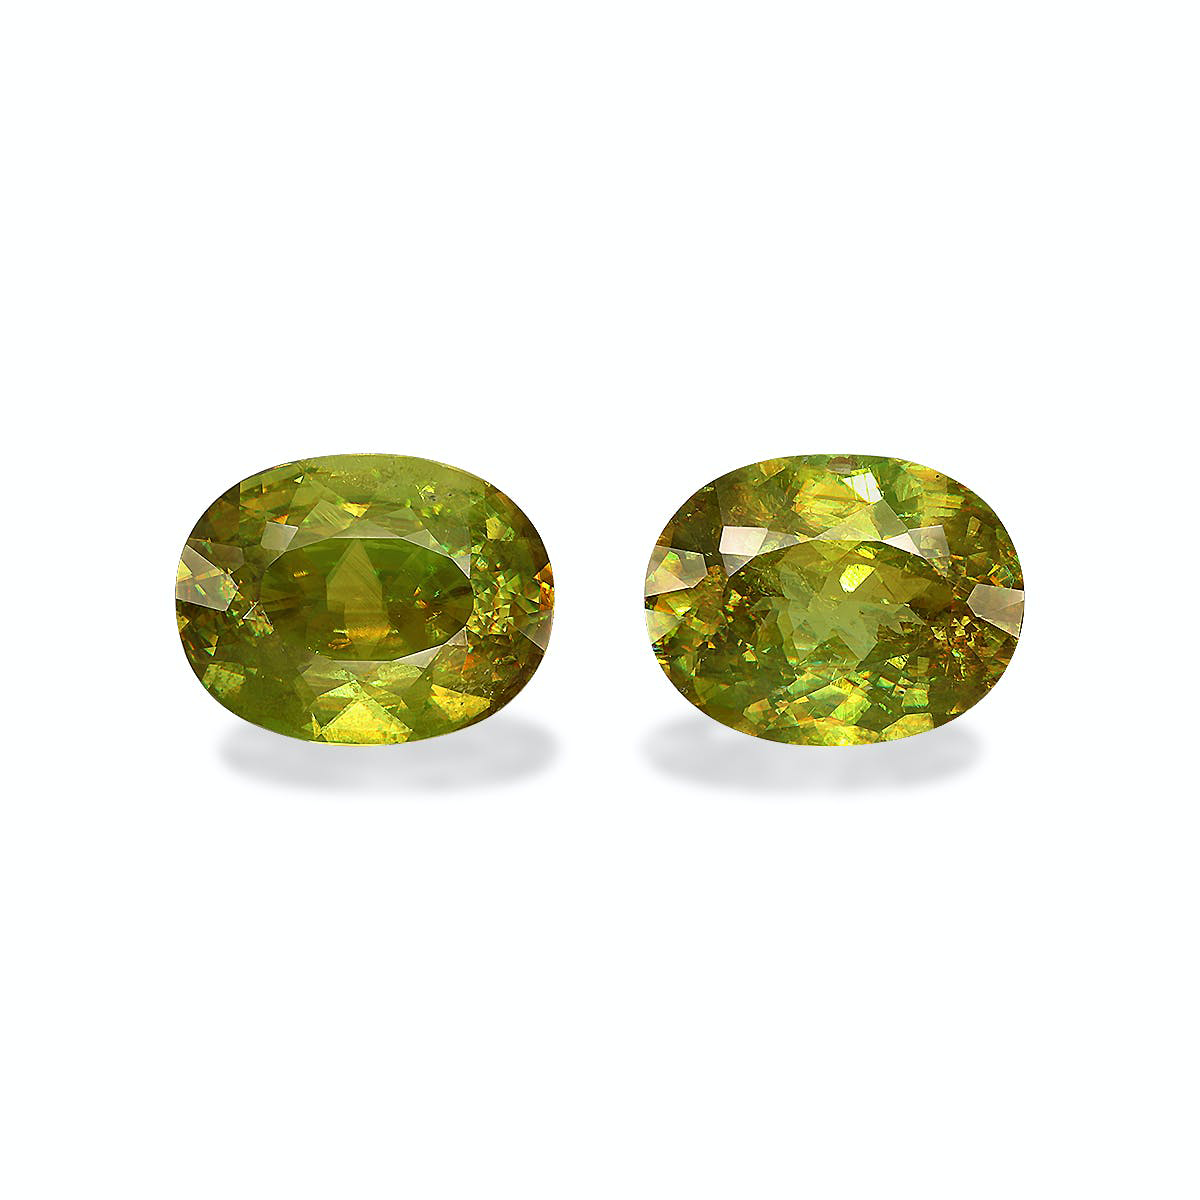 Picture of Lime Green Sphene 14.34ct - Pair (SH1153)